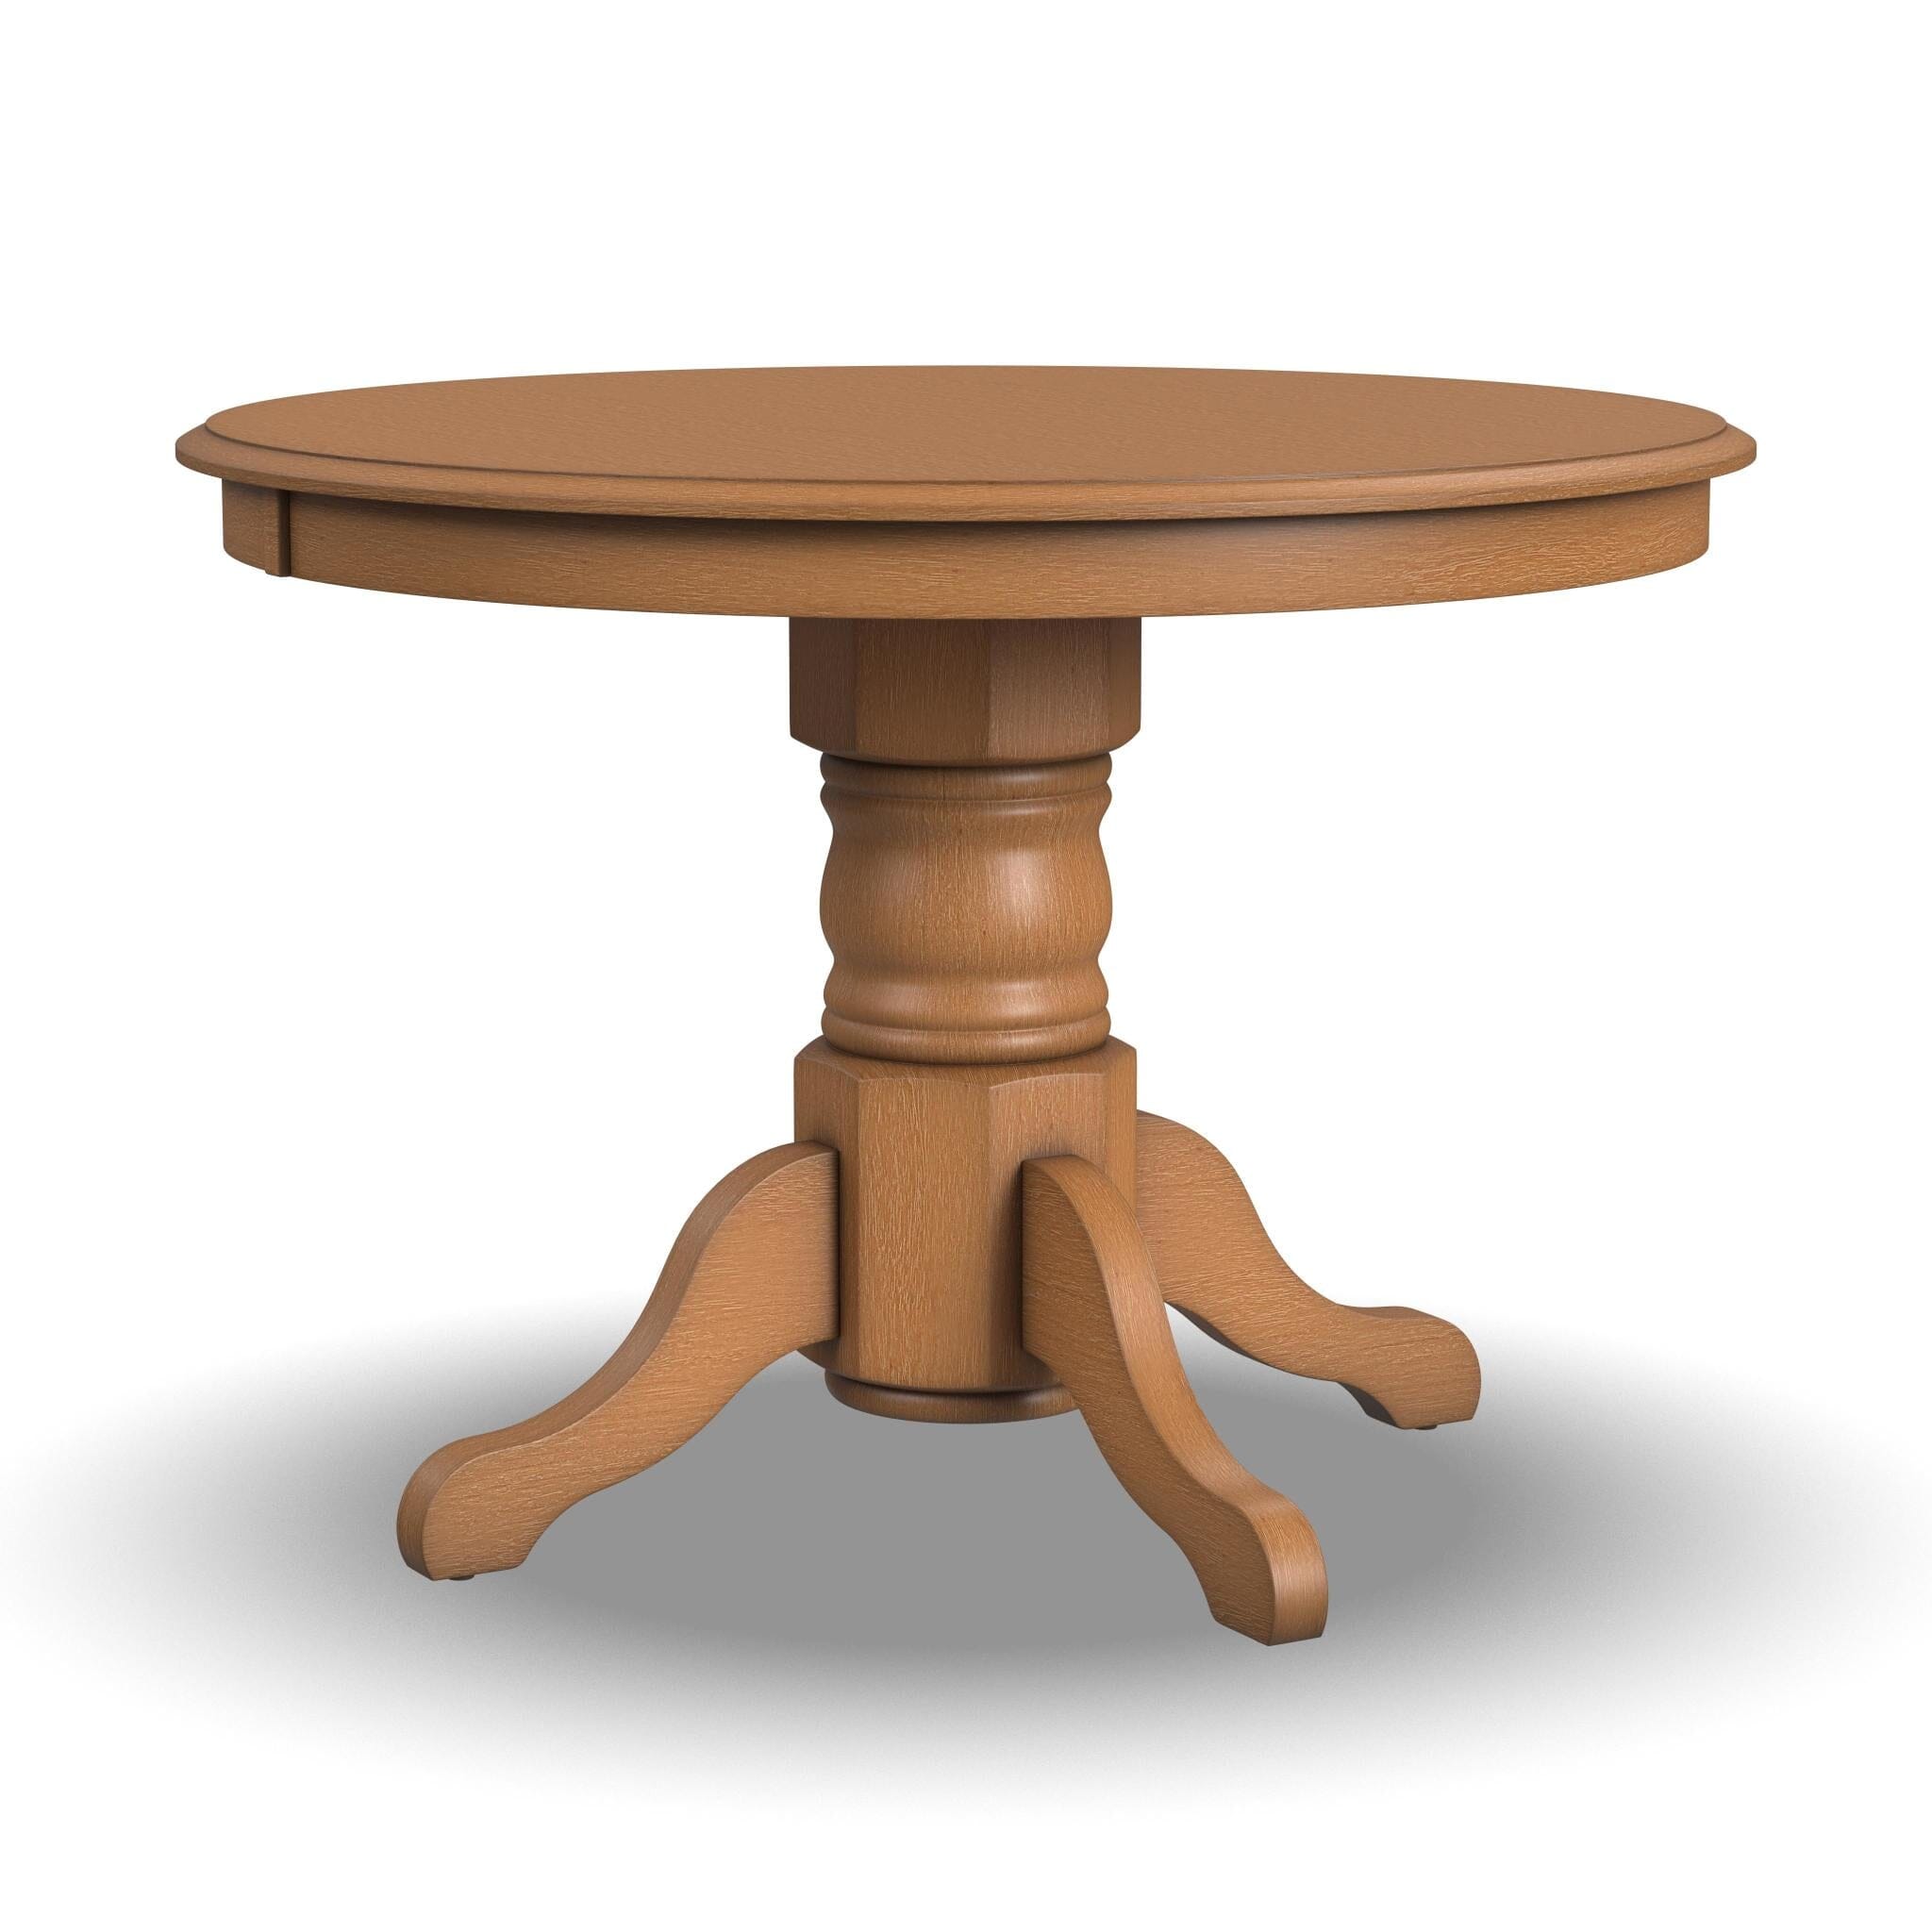 Traditional Pedestal Dining Table By Cambridge Dining Table Cambridge